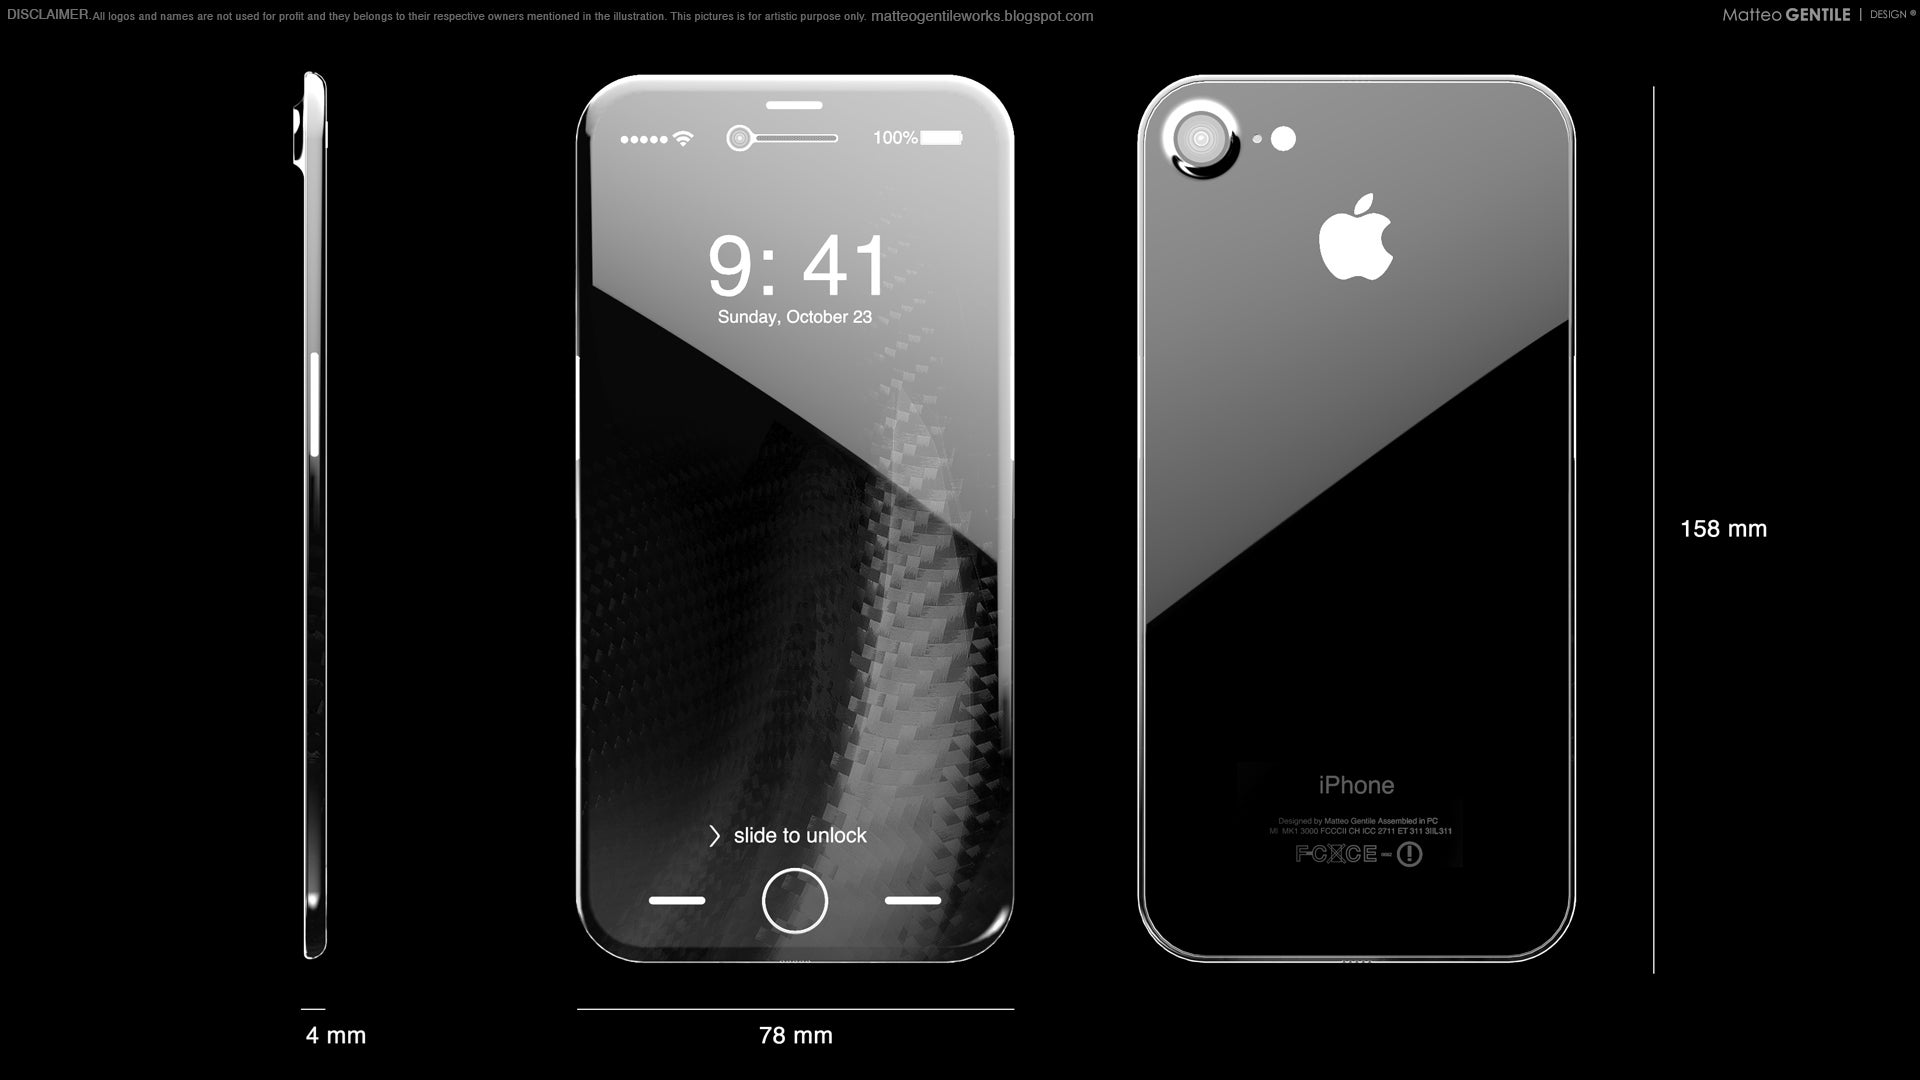 Wraparound display, embedded sensors - this OLED iPhone 8 concept image tries to depict Apple's 2017 surprise - OLED 'iPhone X' with 5.8&quot; wraparound display prepped for a 'feature-rich' launch, tips analyst